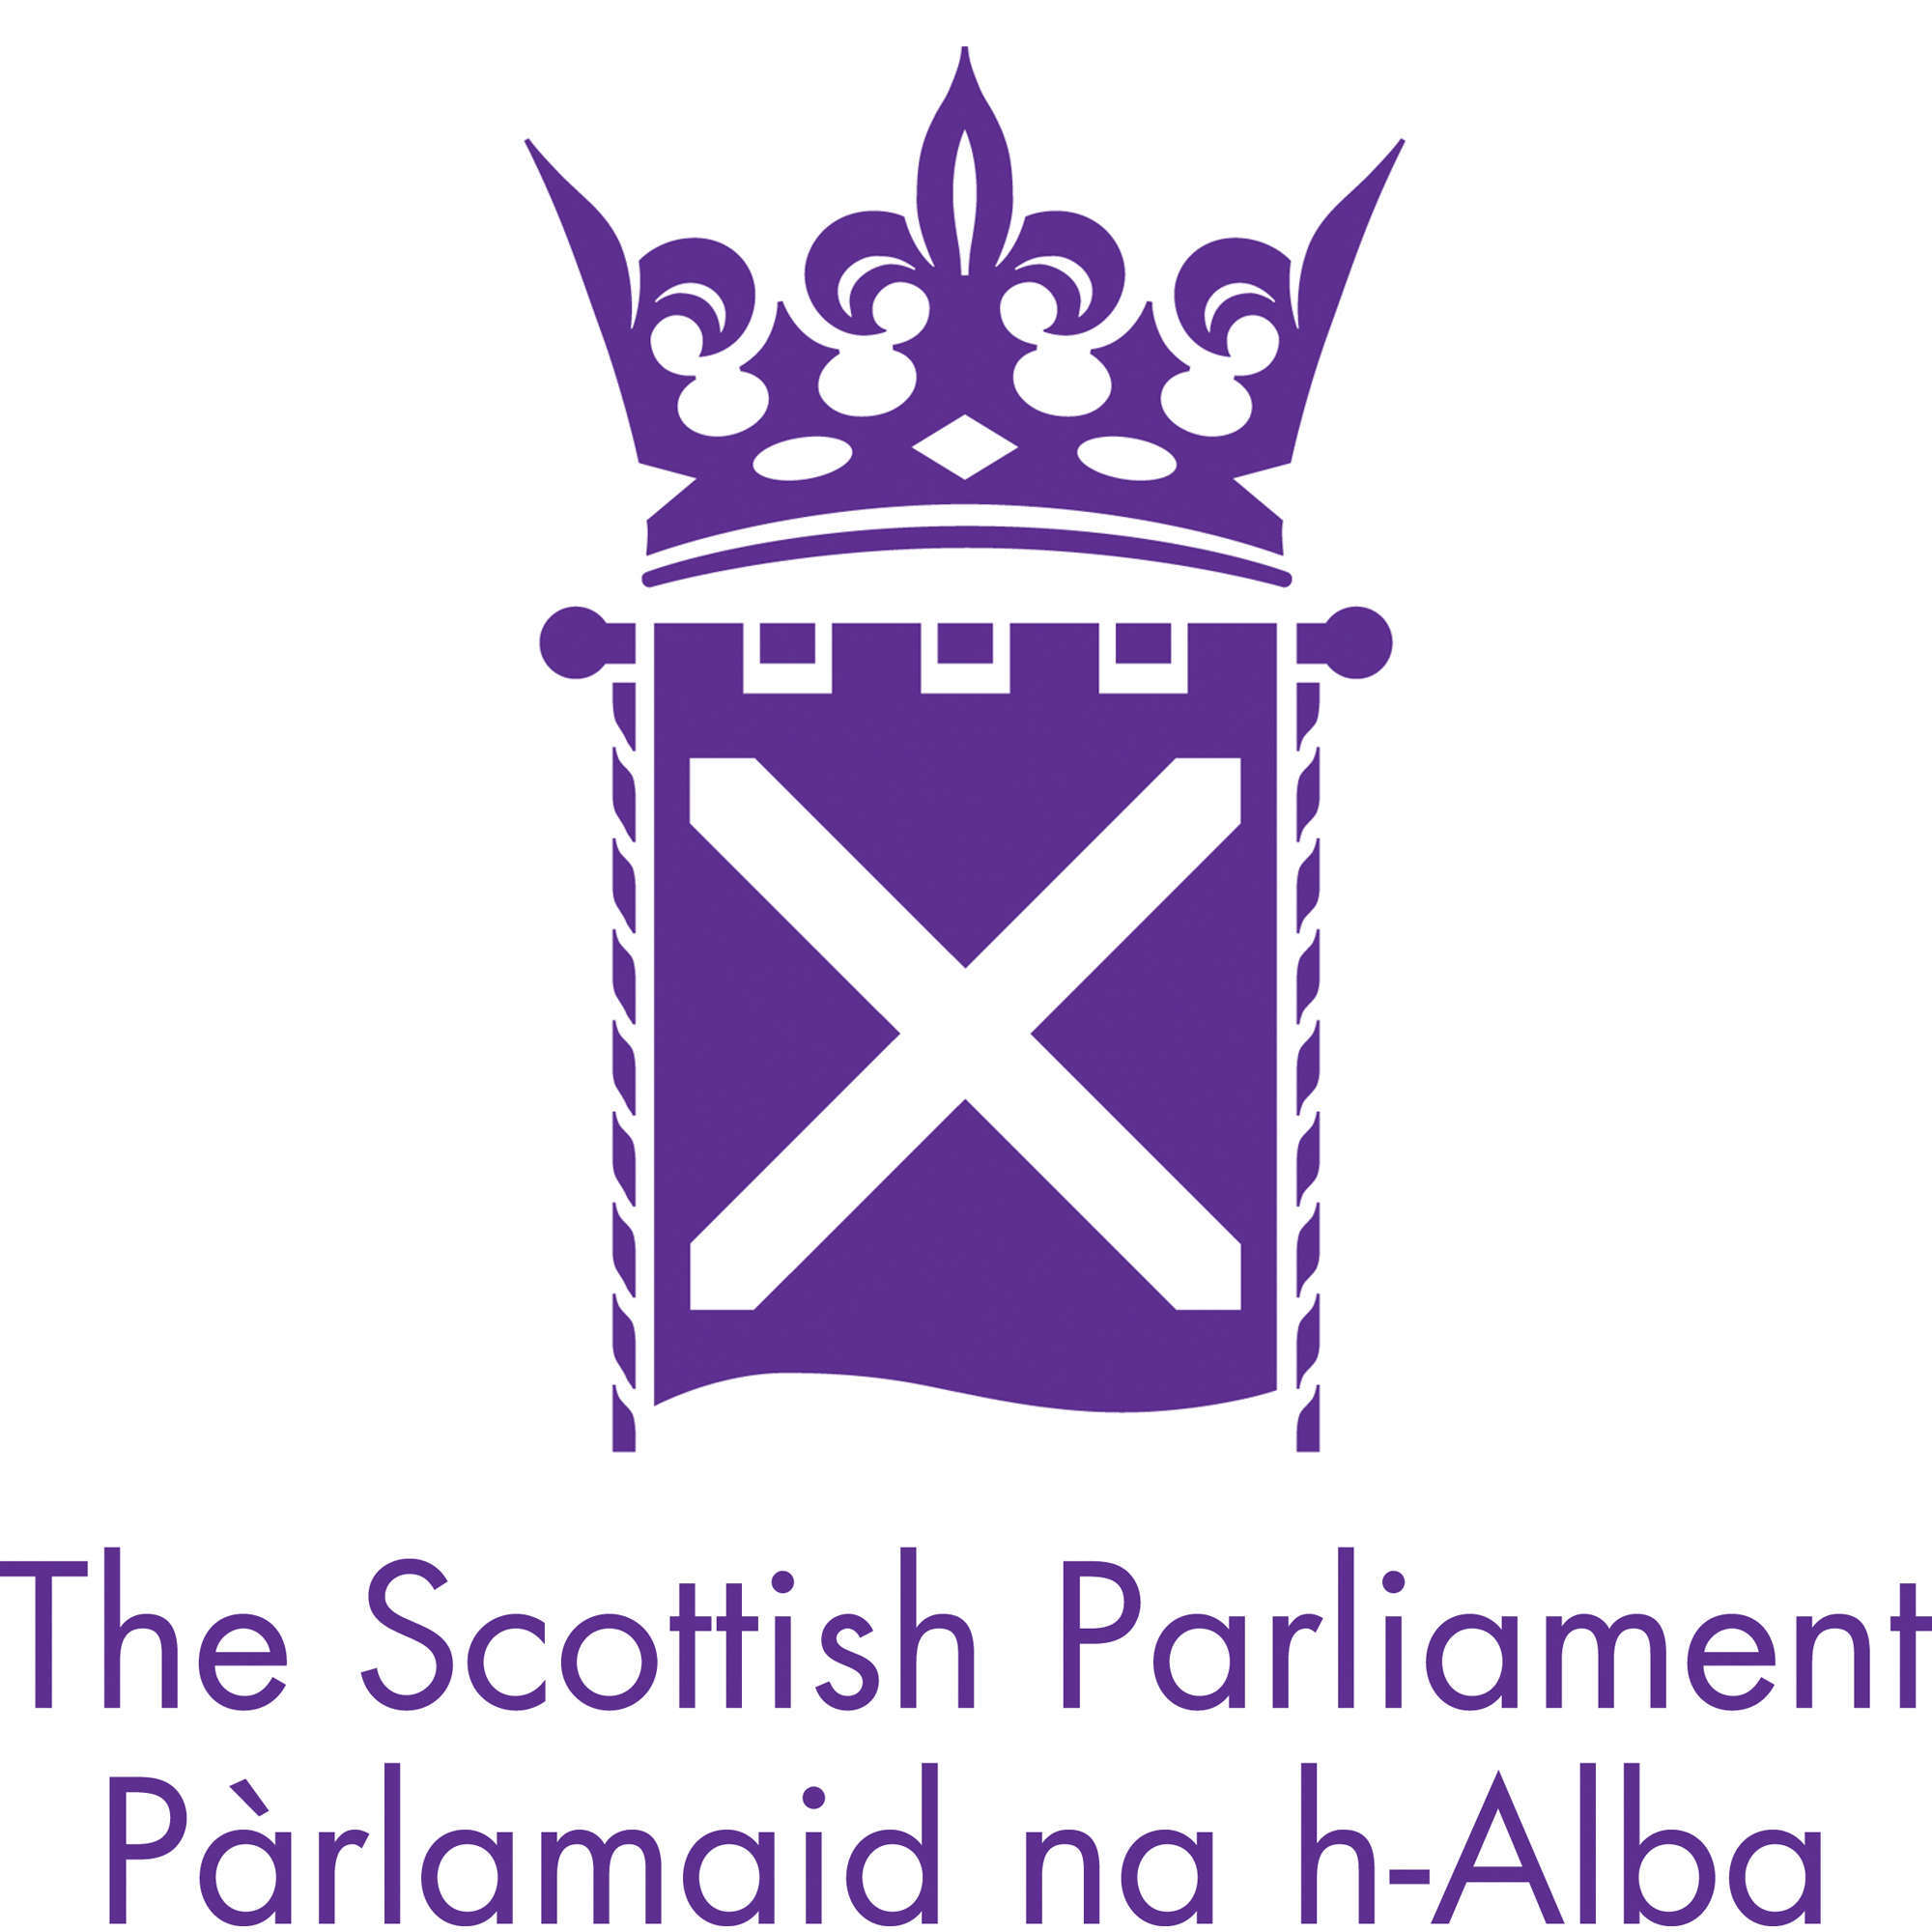 #ScotParl20: Chief Executive of The Scottish Parliament, Sir Paul Grice